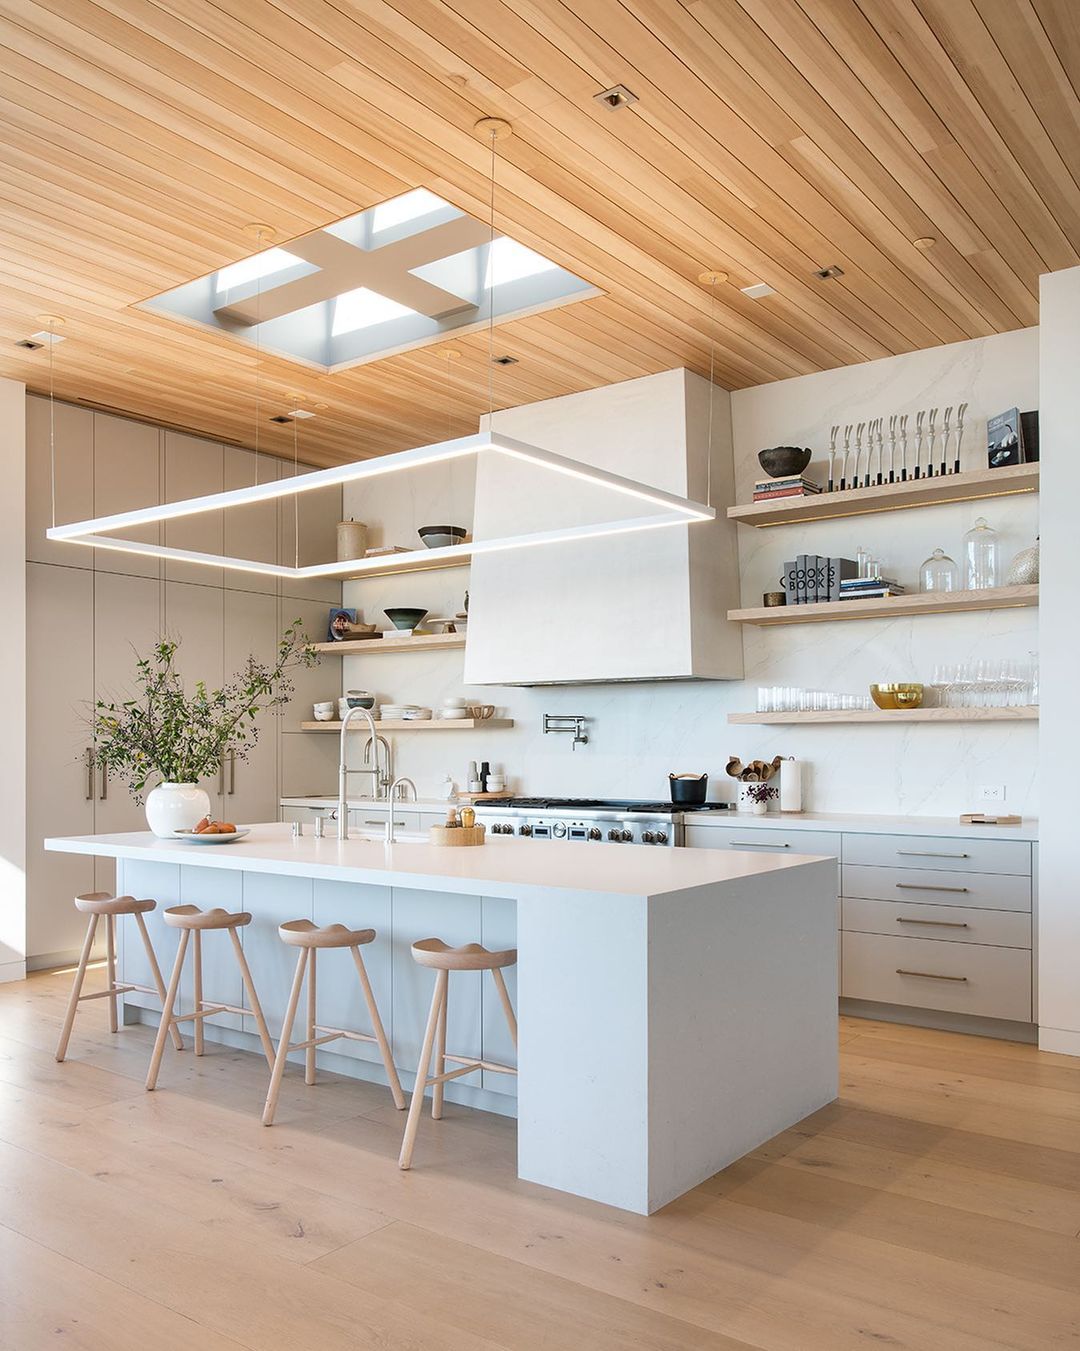 Modern Kitchen with Large Light Overhead. Photo by Instagram user @laneylainc